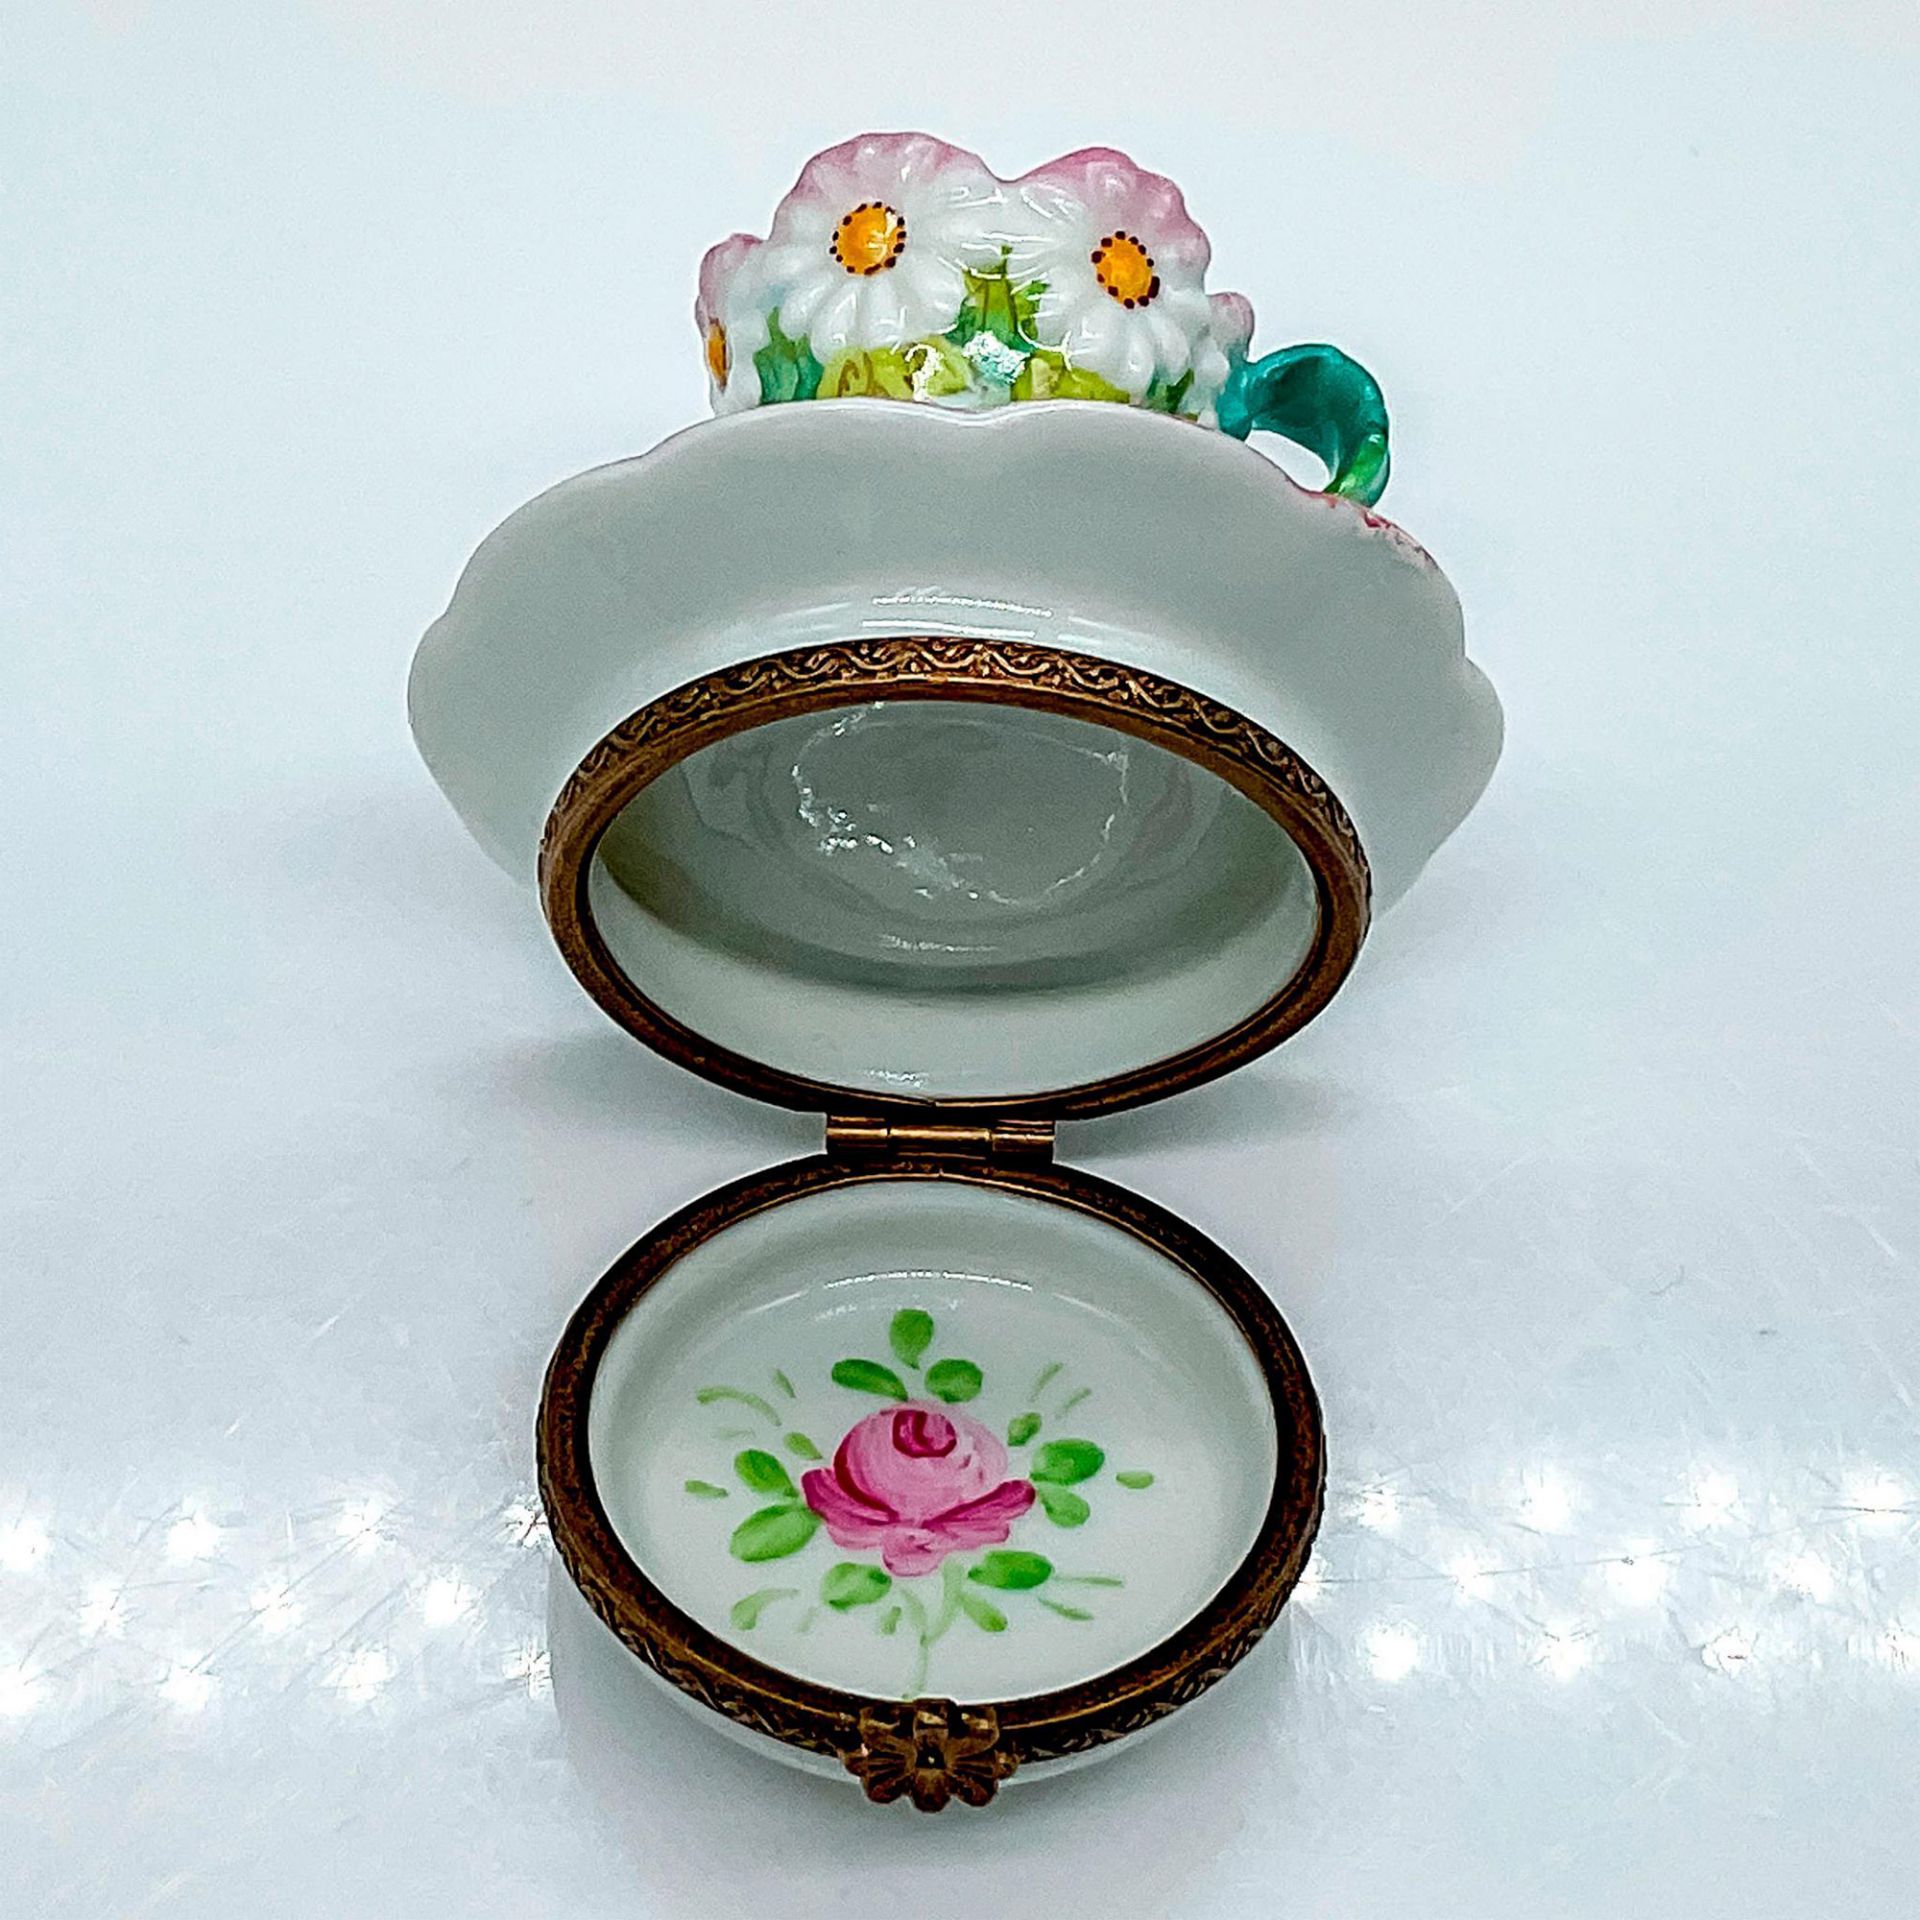 Limoges PV Porcelain Tea Cup and Saucer Charm Box - Image 2 of 3